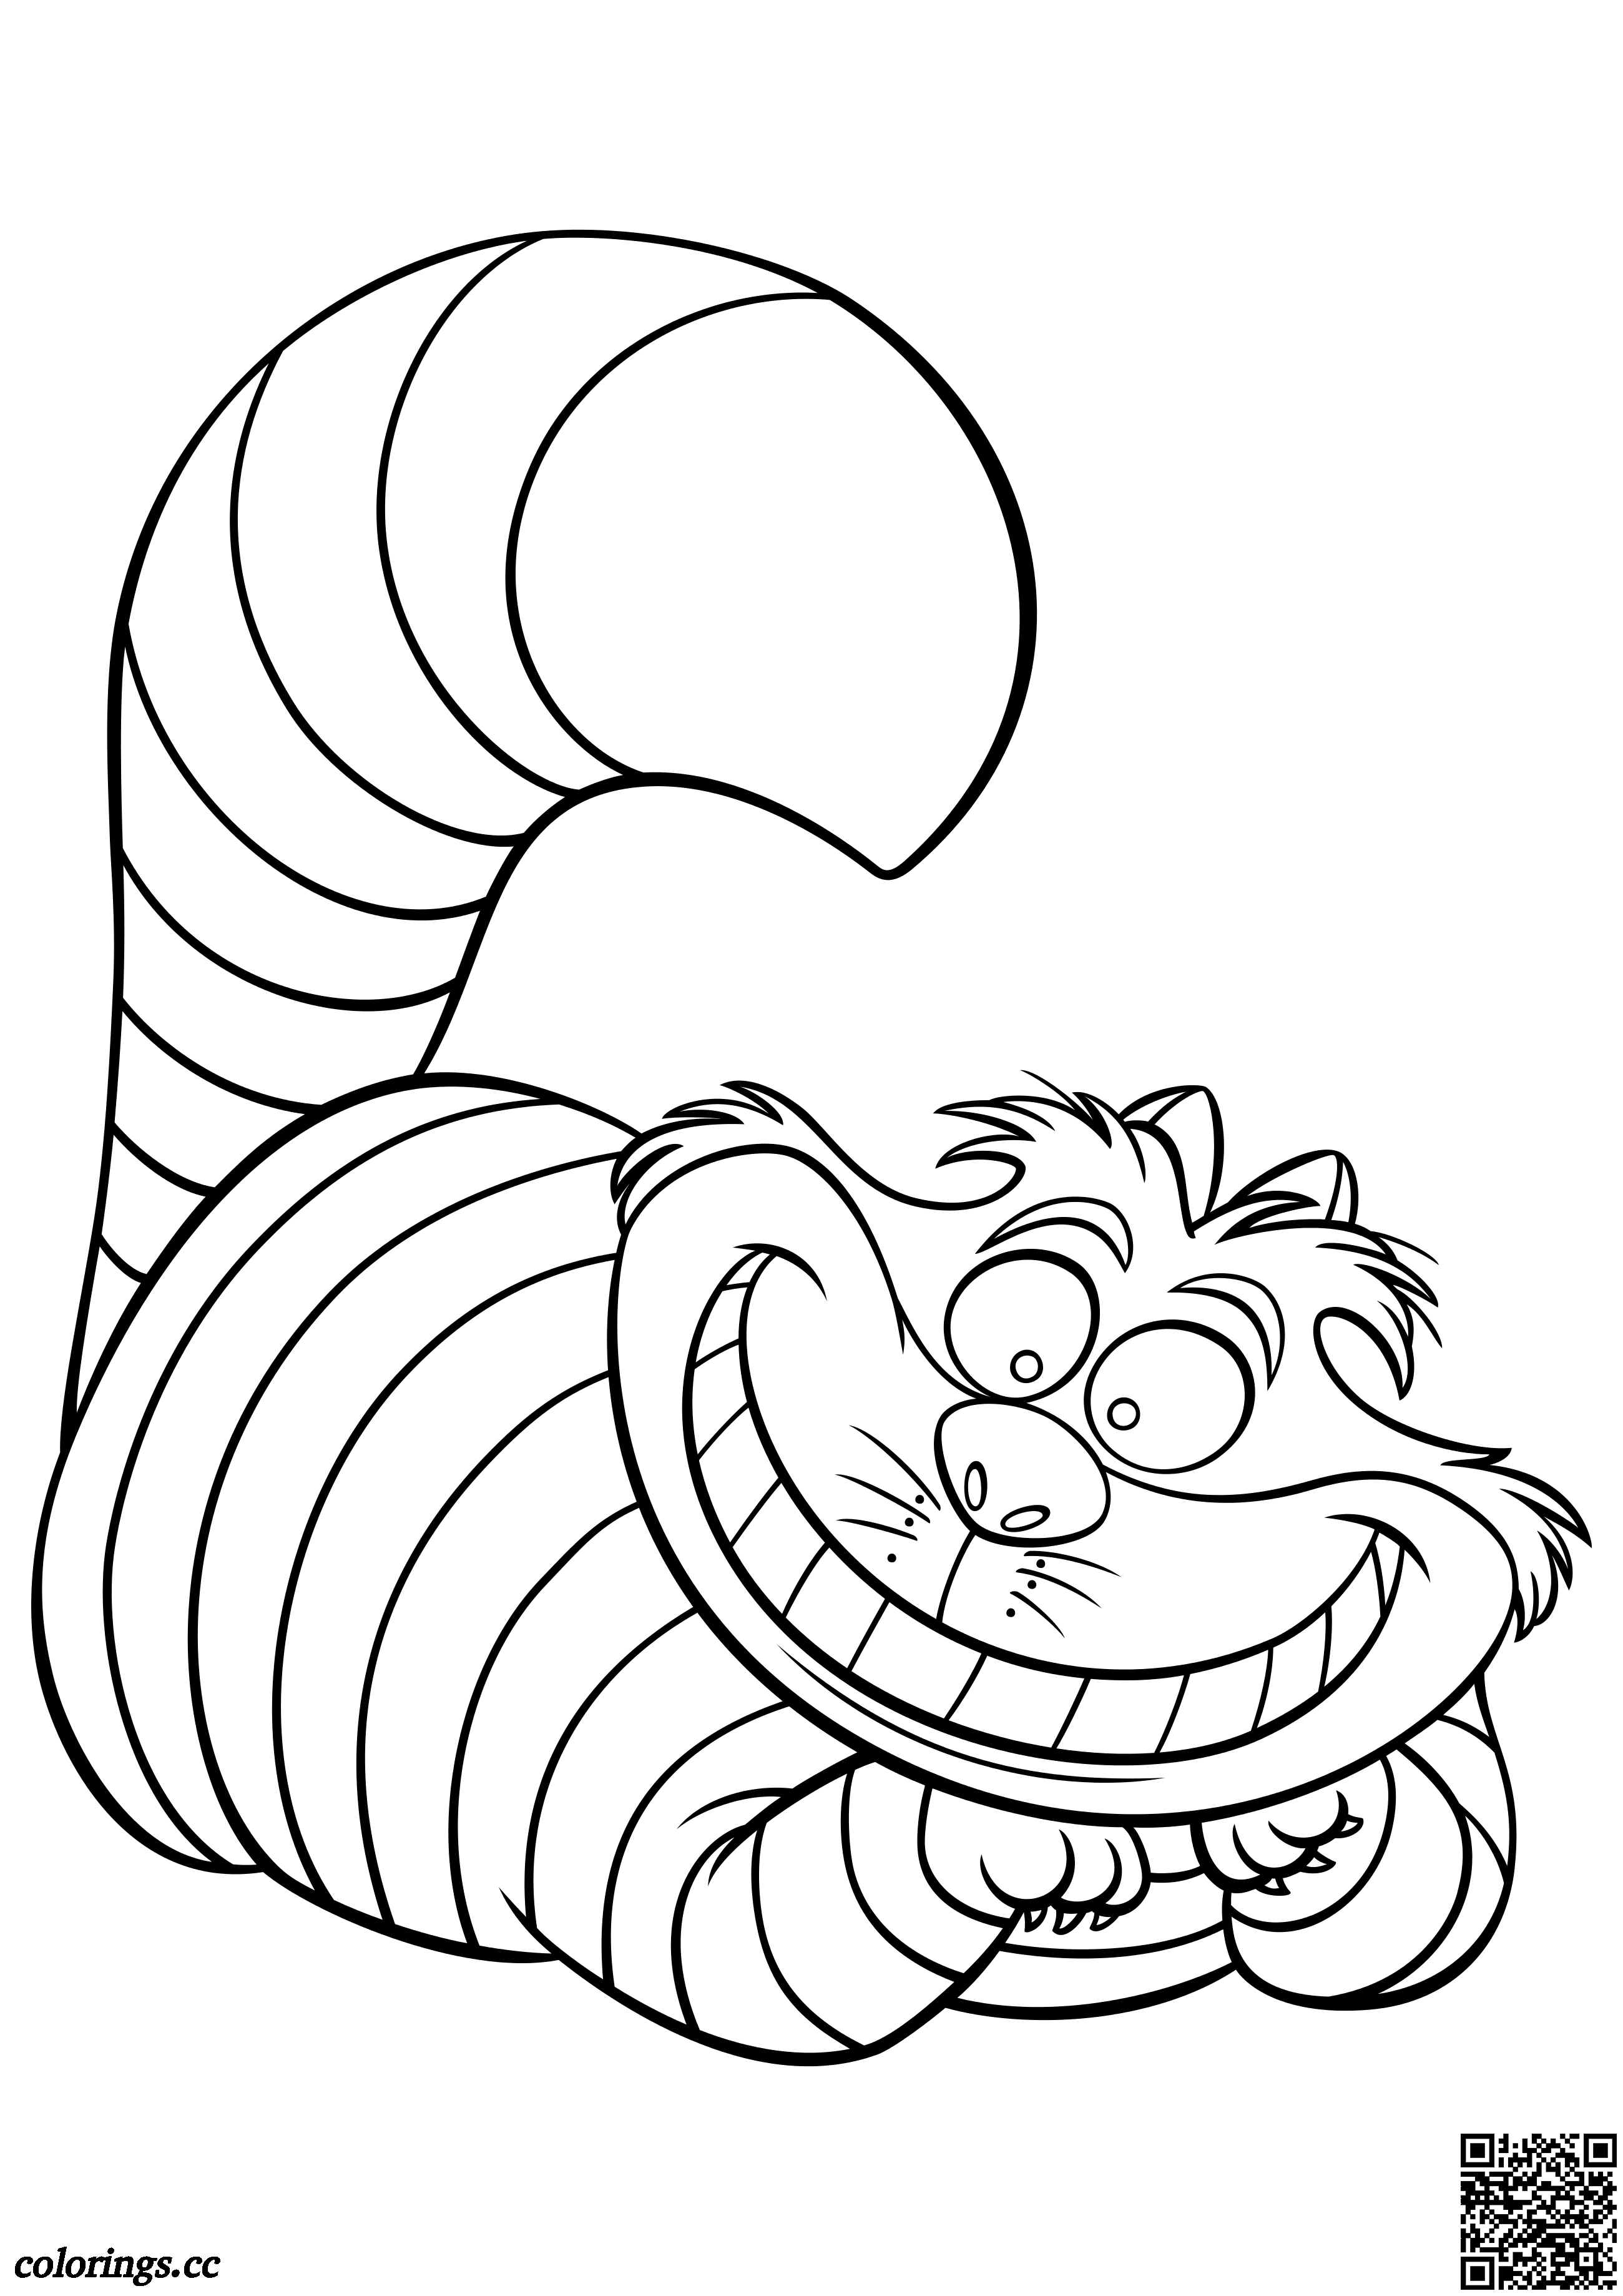 Cheshire Cat coloring pages, Alice in Wonderland coloring pages ...